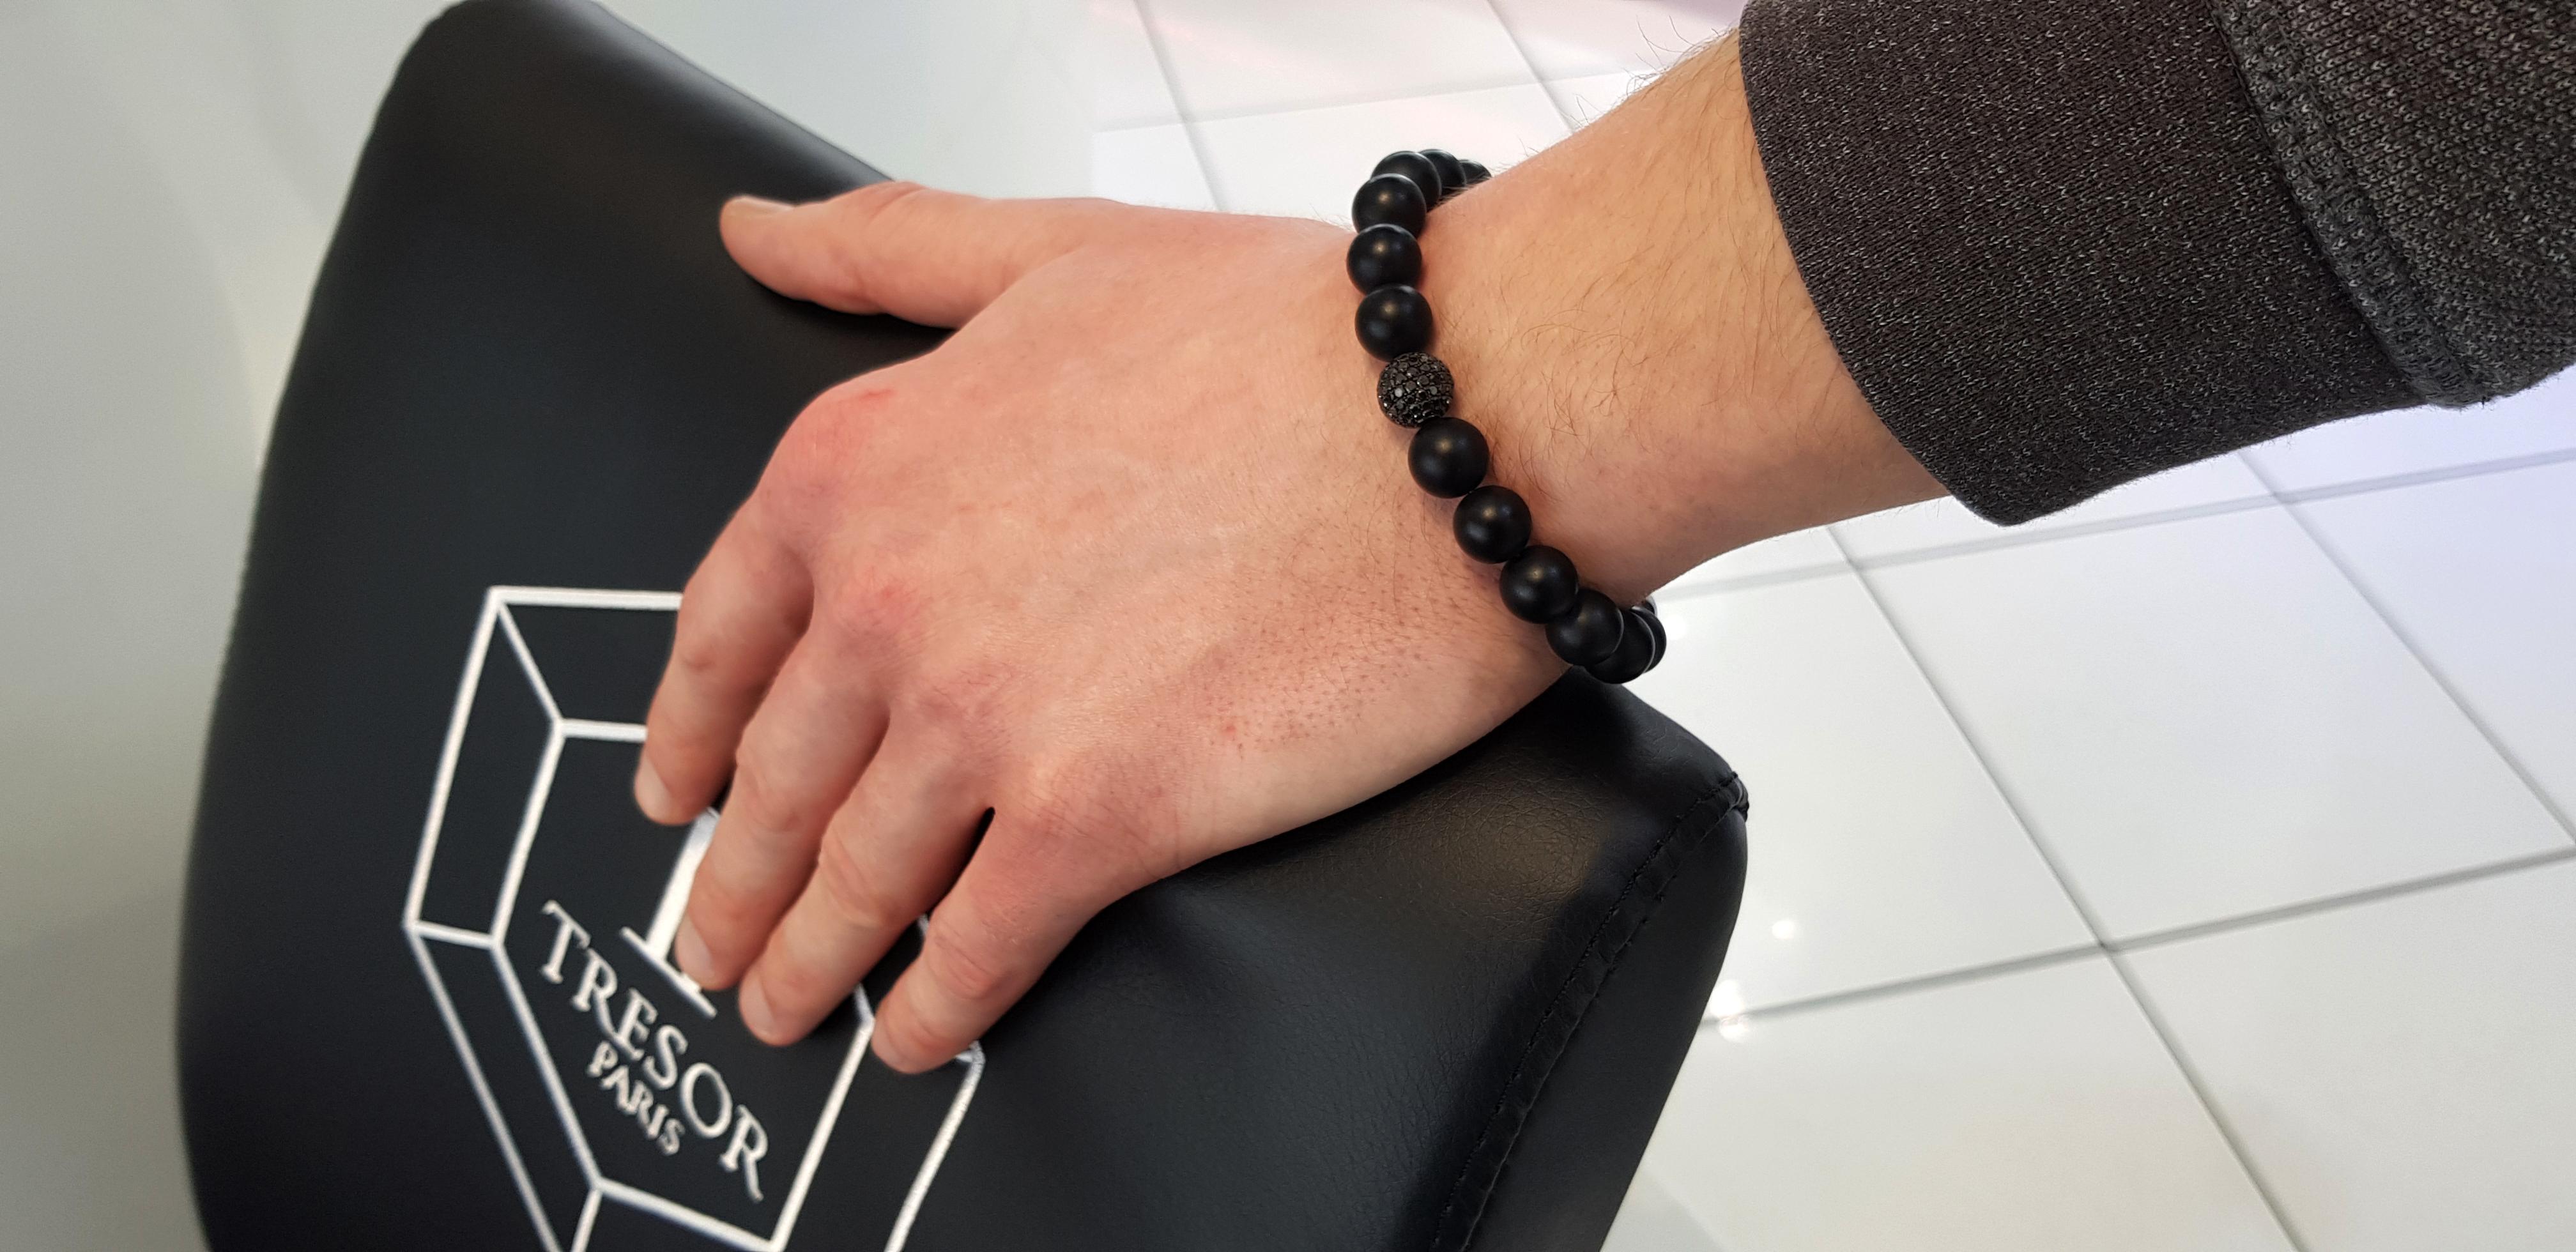 The Original Tresor Paris Bracelet from the Jubilée collection featuring 1.80 Carat Pave set Black Round Diamond bead set in 18 Karat White Gold. The bracelet has 3 stainless steel beads and 17 matte Black satin agate beads. Size will fit from 7.00